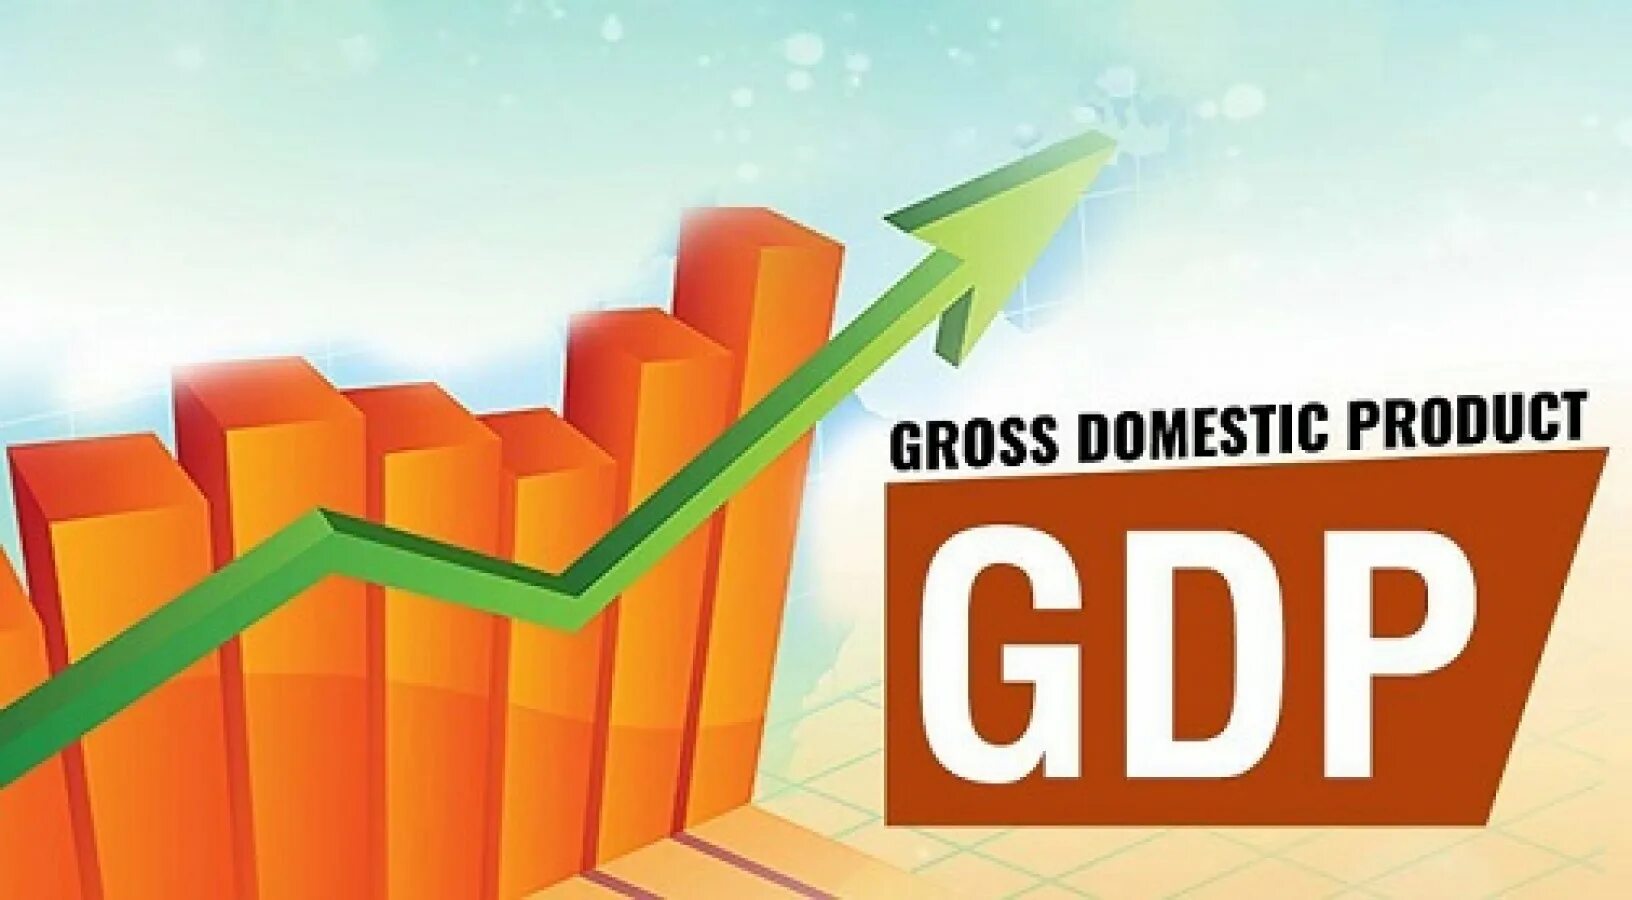 Gross domestic product. GDP. GDP картинки. GDP Production.